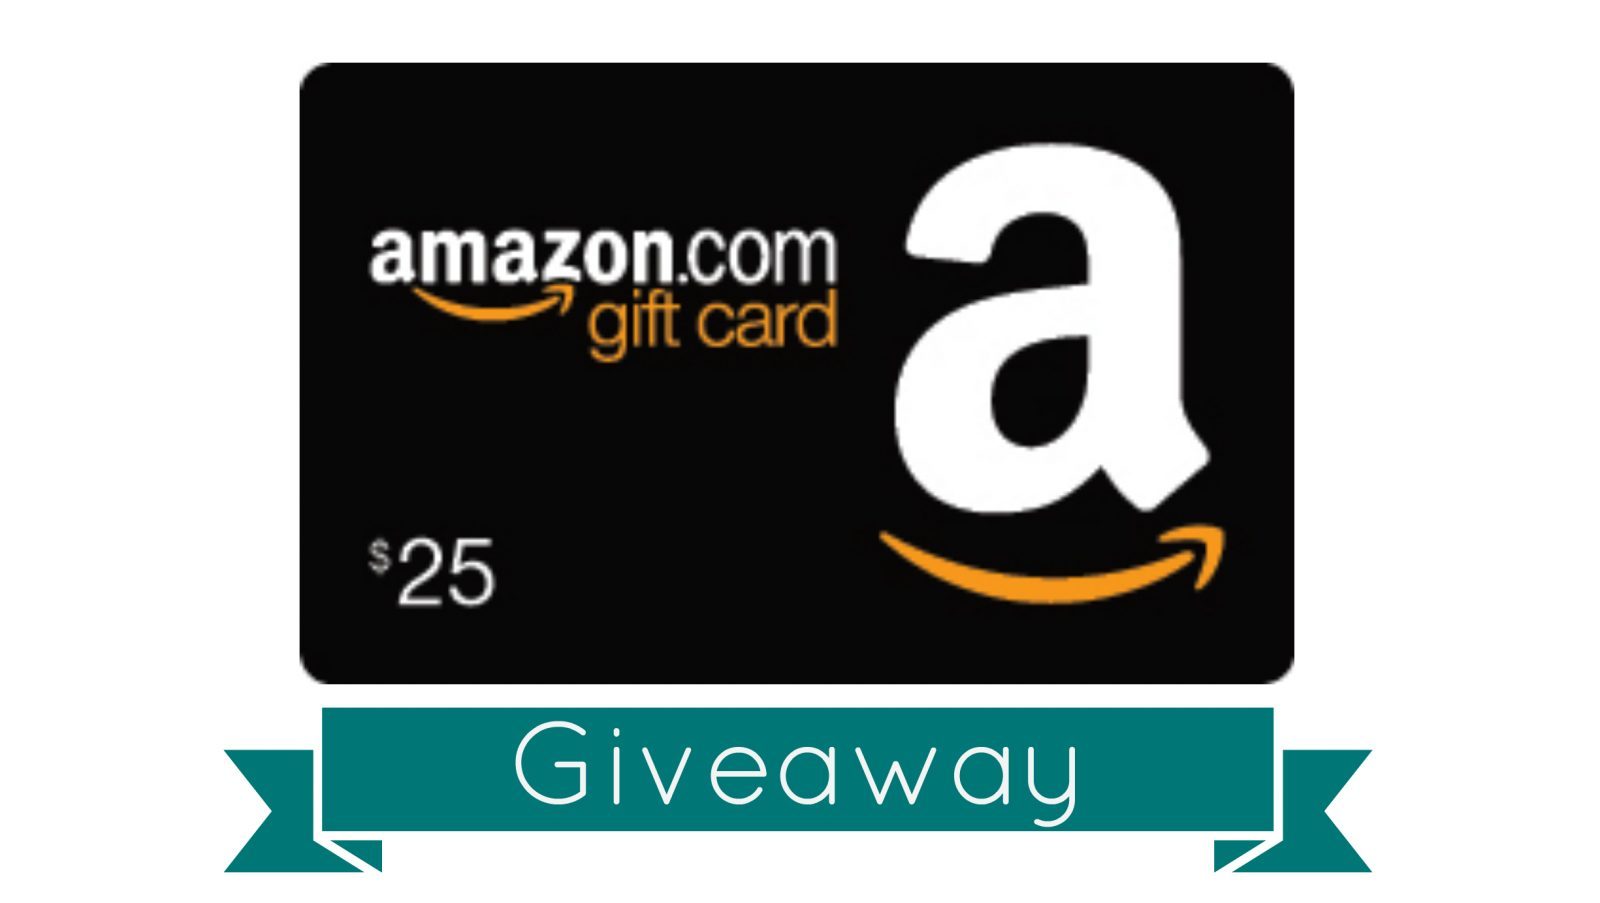 Win a 25 Amazon Gift Card from The Frugal South! The